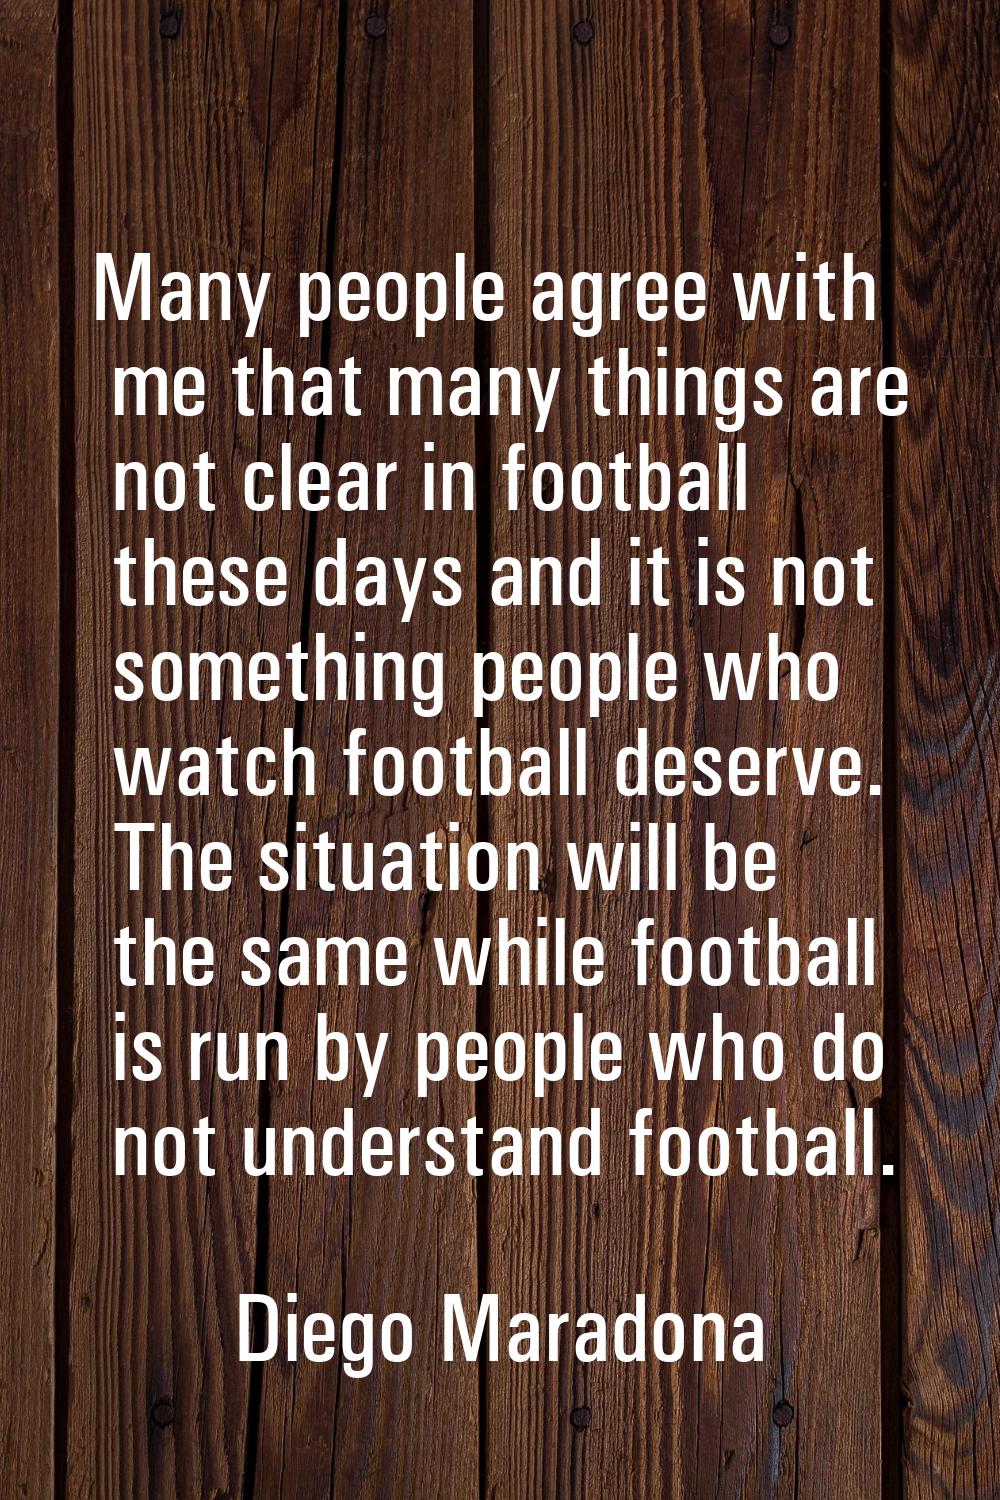 Many people agree with me that many things are not clear in football these days and it is not somet